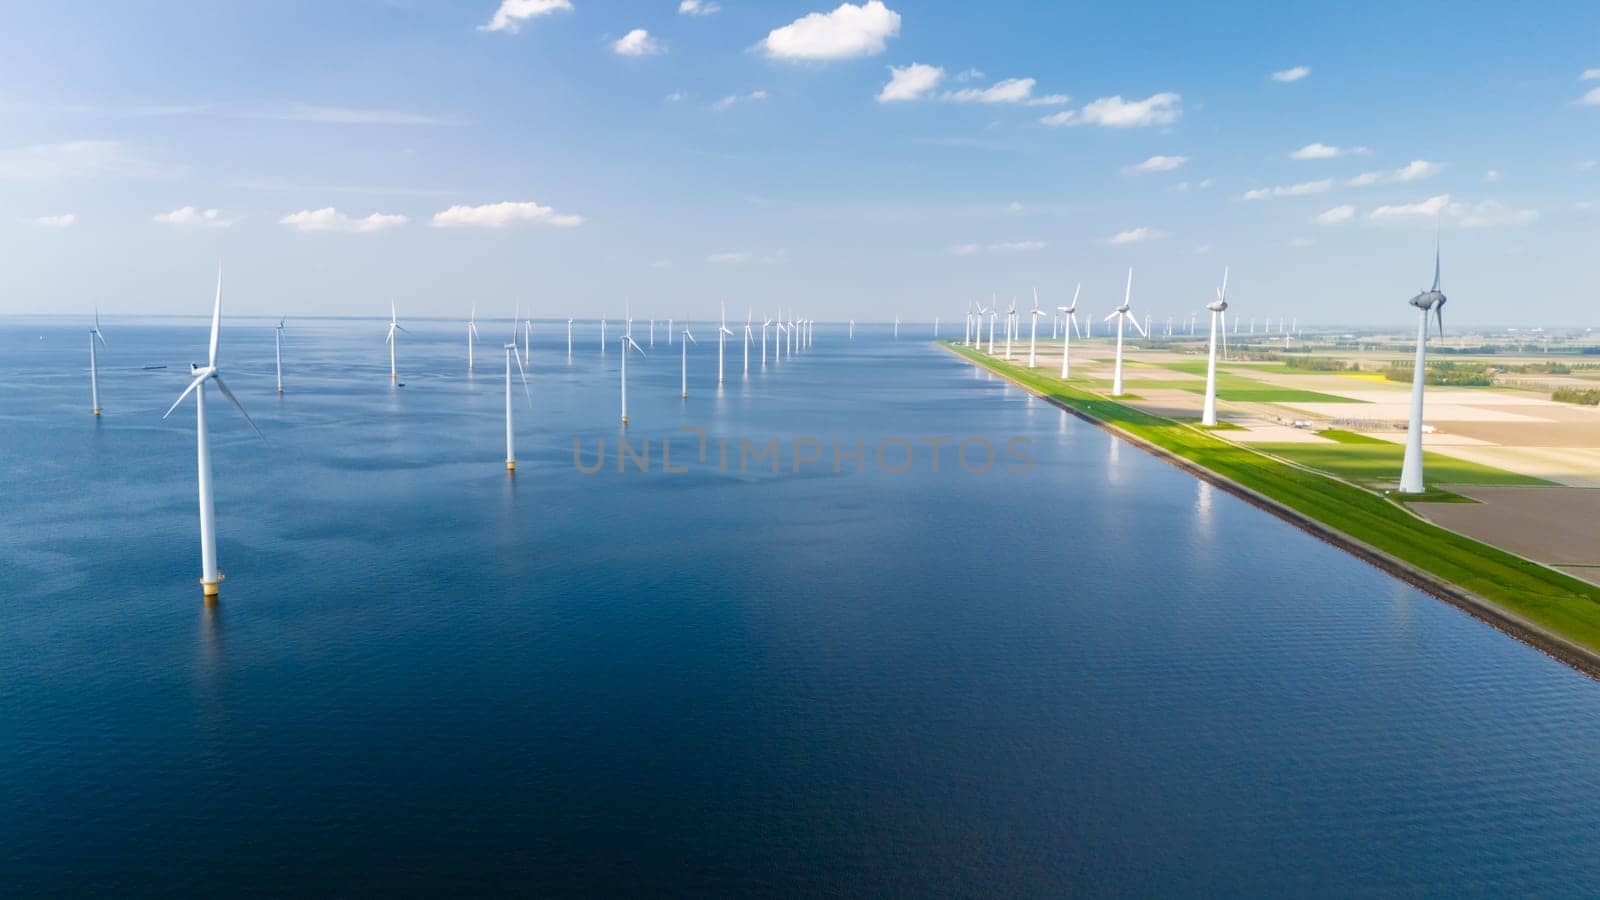 A serene scene of vast water surrounded by elegant windmills in Flevoland, Netherlands. The windmills stand tall, harnessing the power of the wind to generate energy by fokkebok